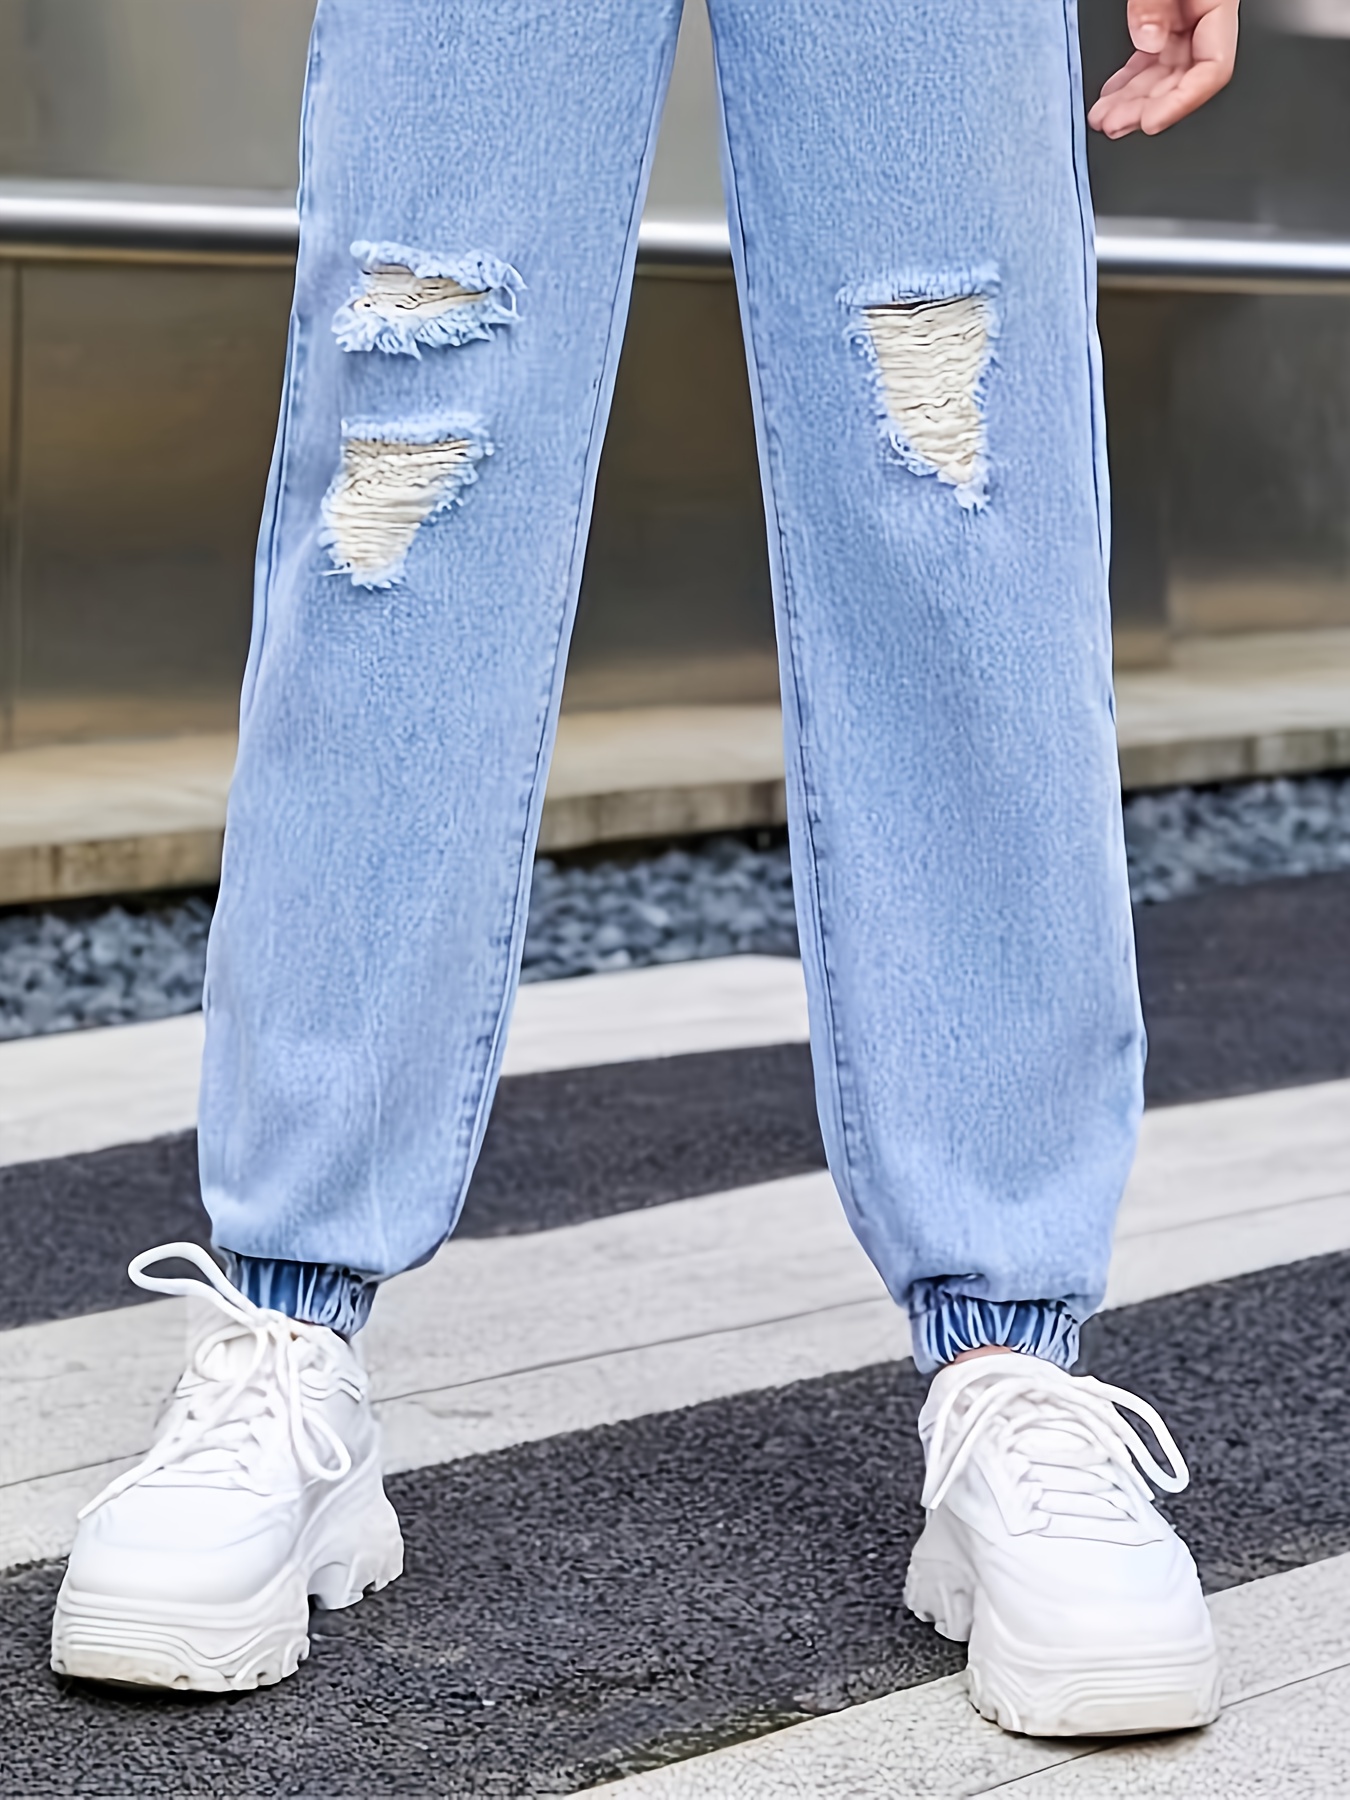 Everyday Girls Casual Ripped Jogger Jeans Elastic Waist Casual